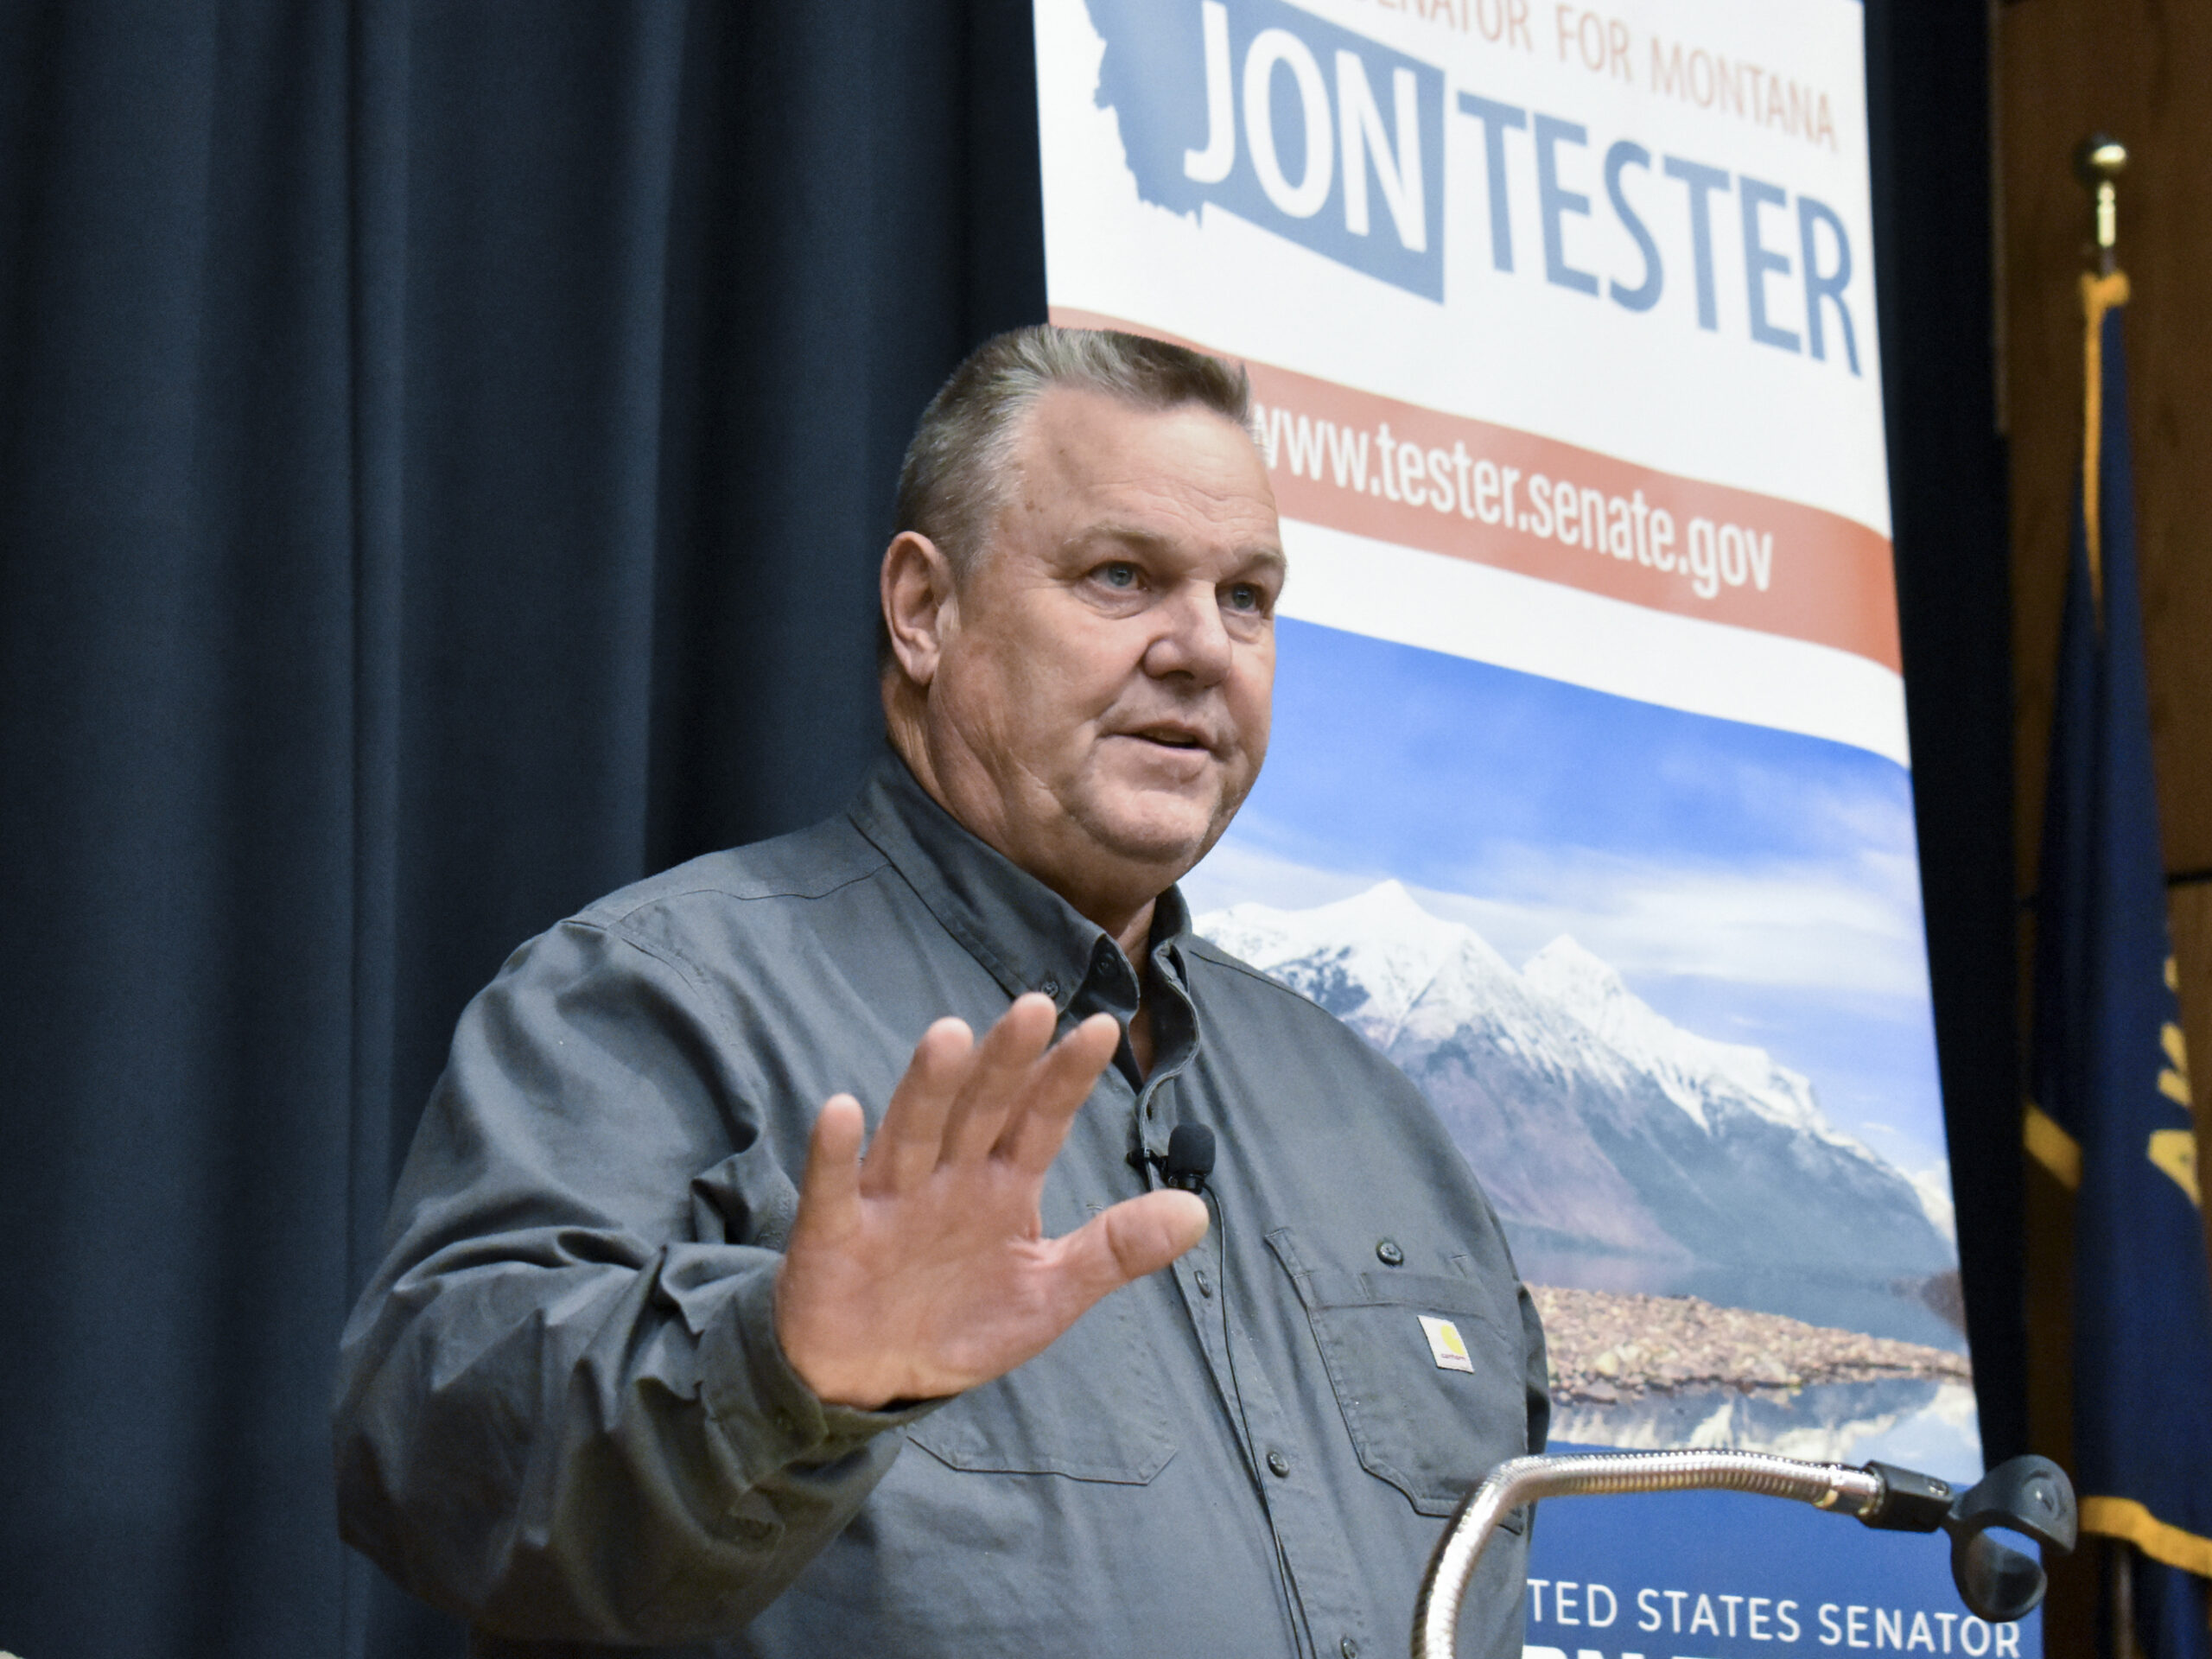 Sen. Jon Tester, D-Mont., speaks during a town hall hosted by the Democratic lawmaker at Montana Technological University, Nov. 10, 2023, in Butte, Mont.